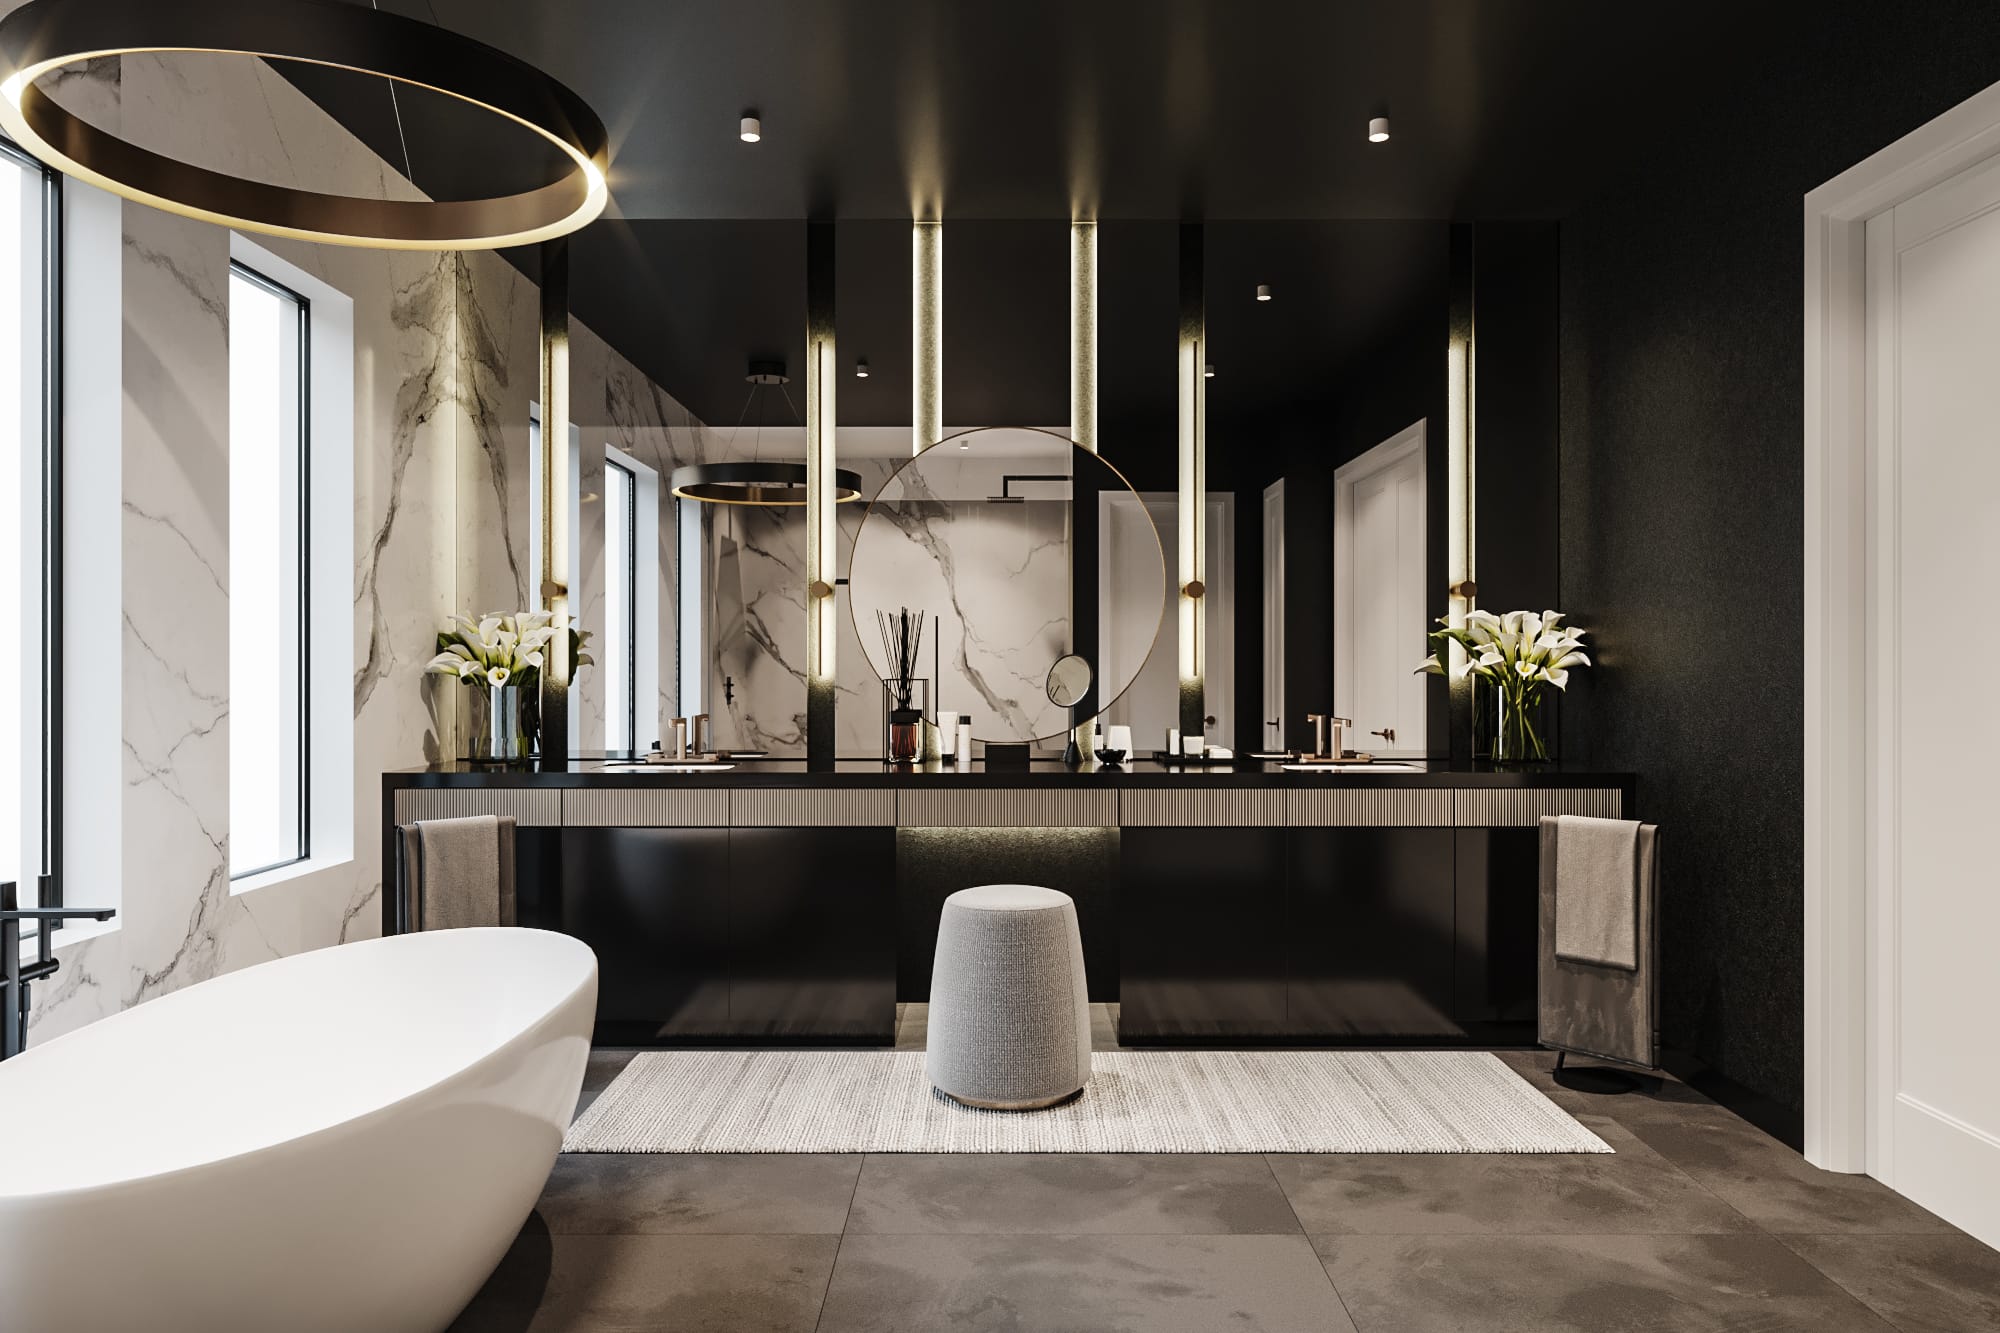 Top 10 Dark Bathroom Ideas for Creating a Moody and Sophisticated Space